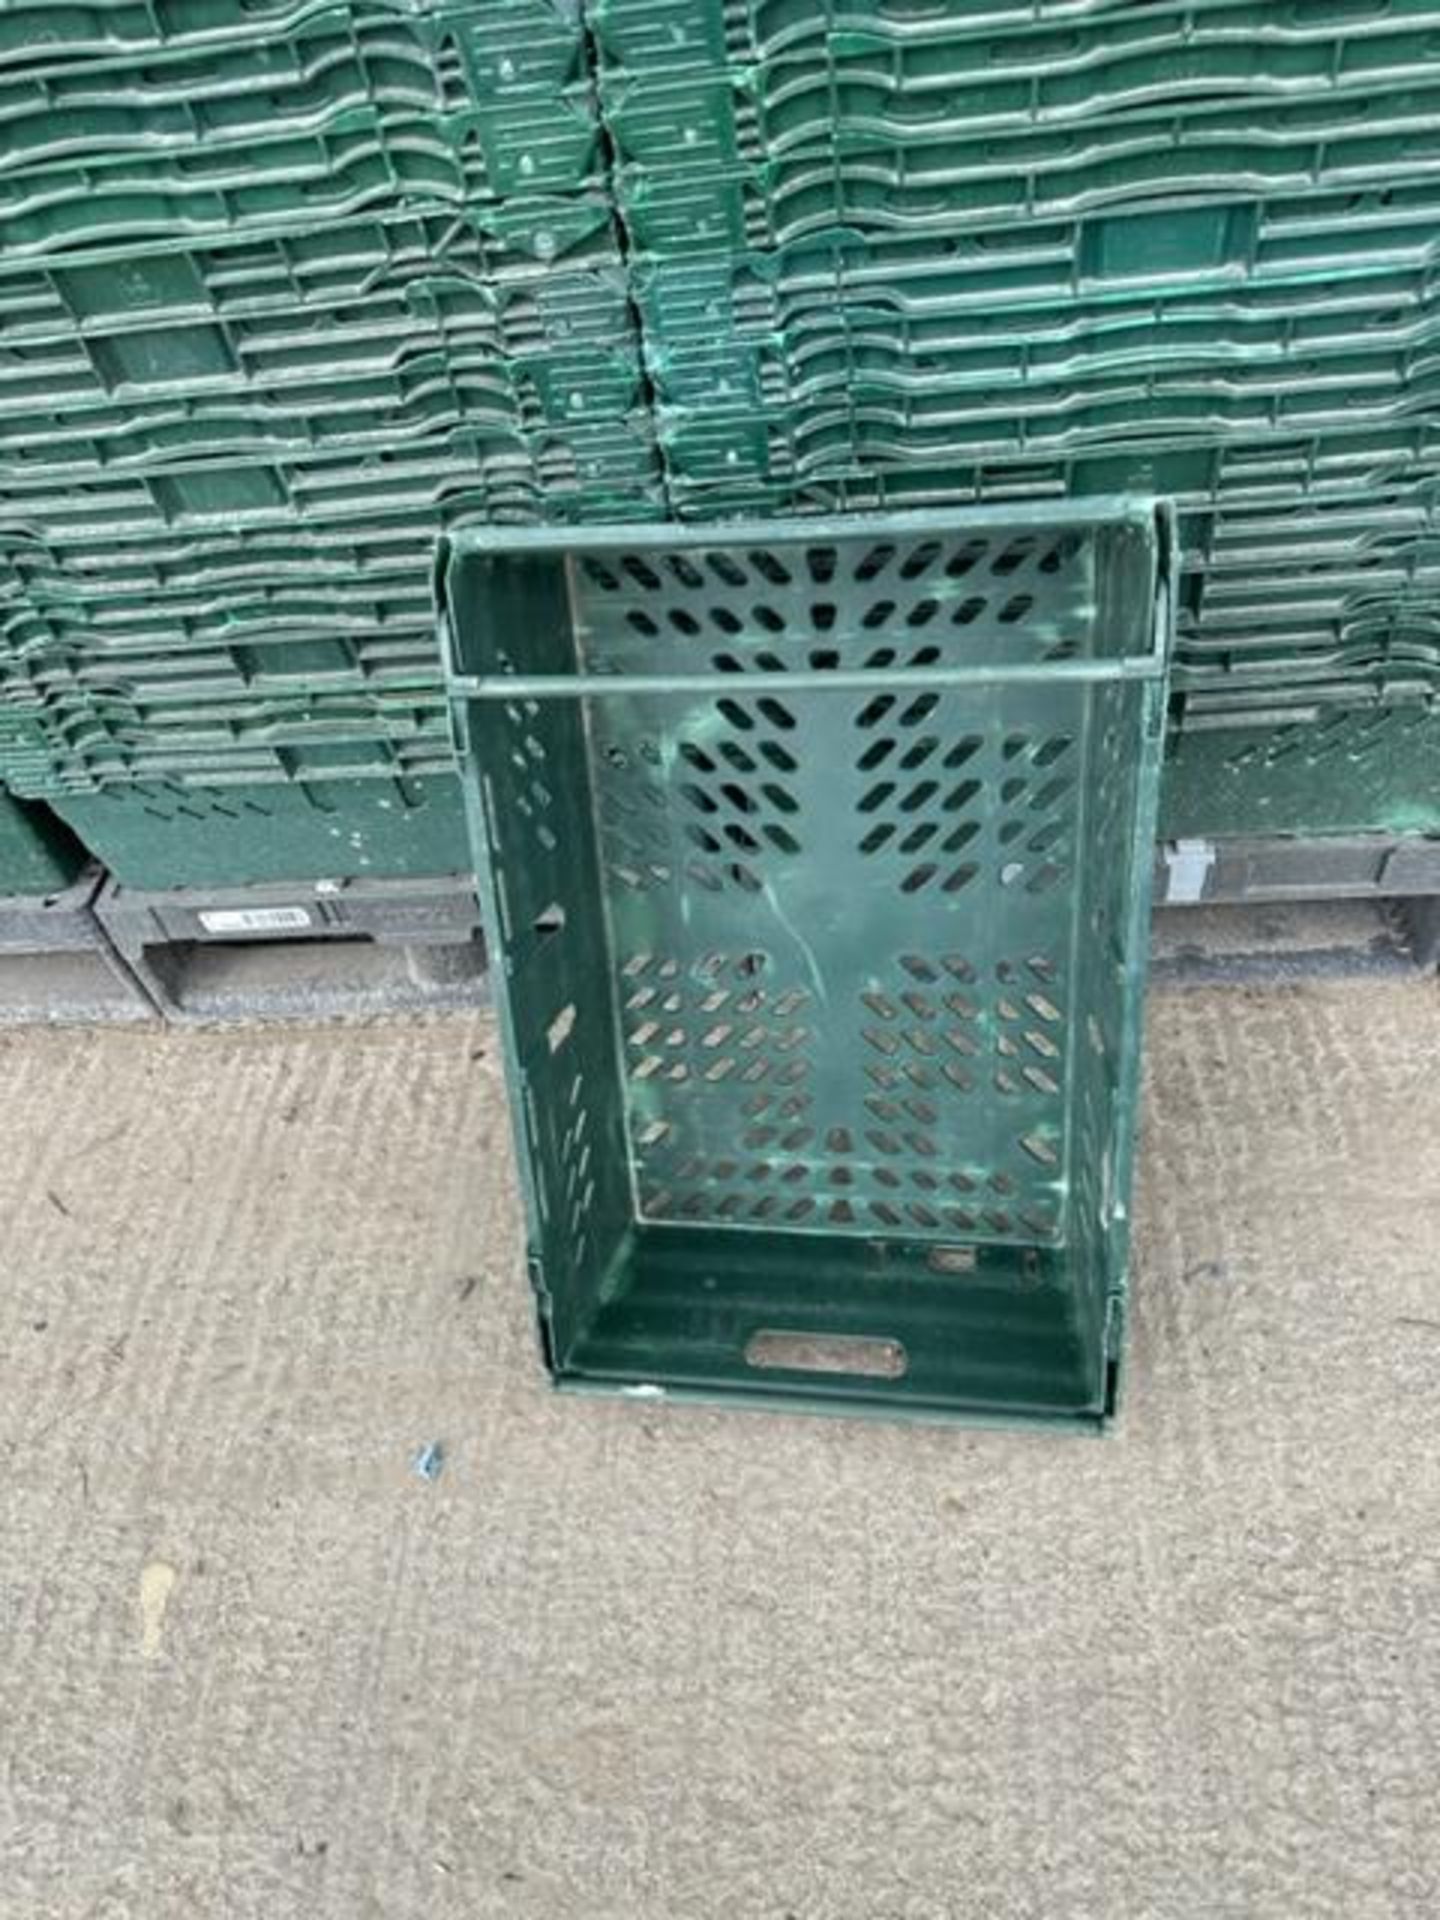 2 x HALF PALLETS CONTAINING 2 STACKS OF 70 TRAYS. (140 TRAYS). - Image 2 of 3